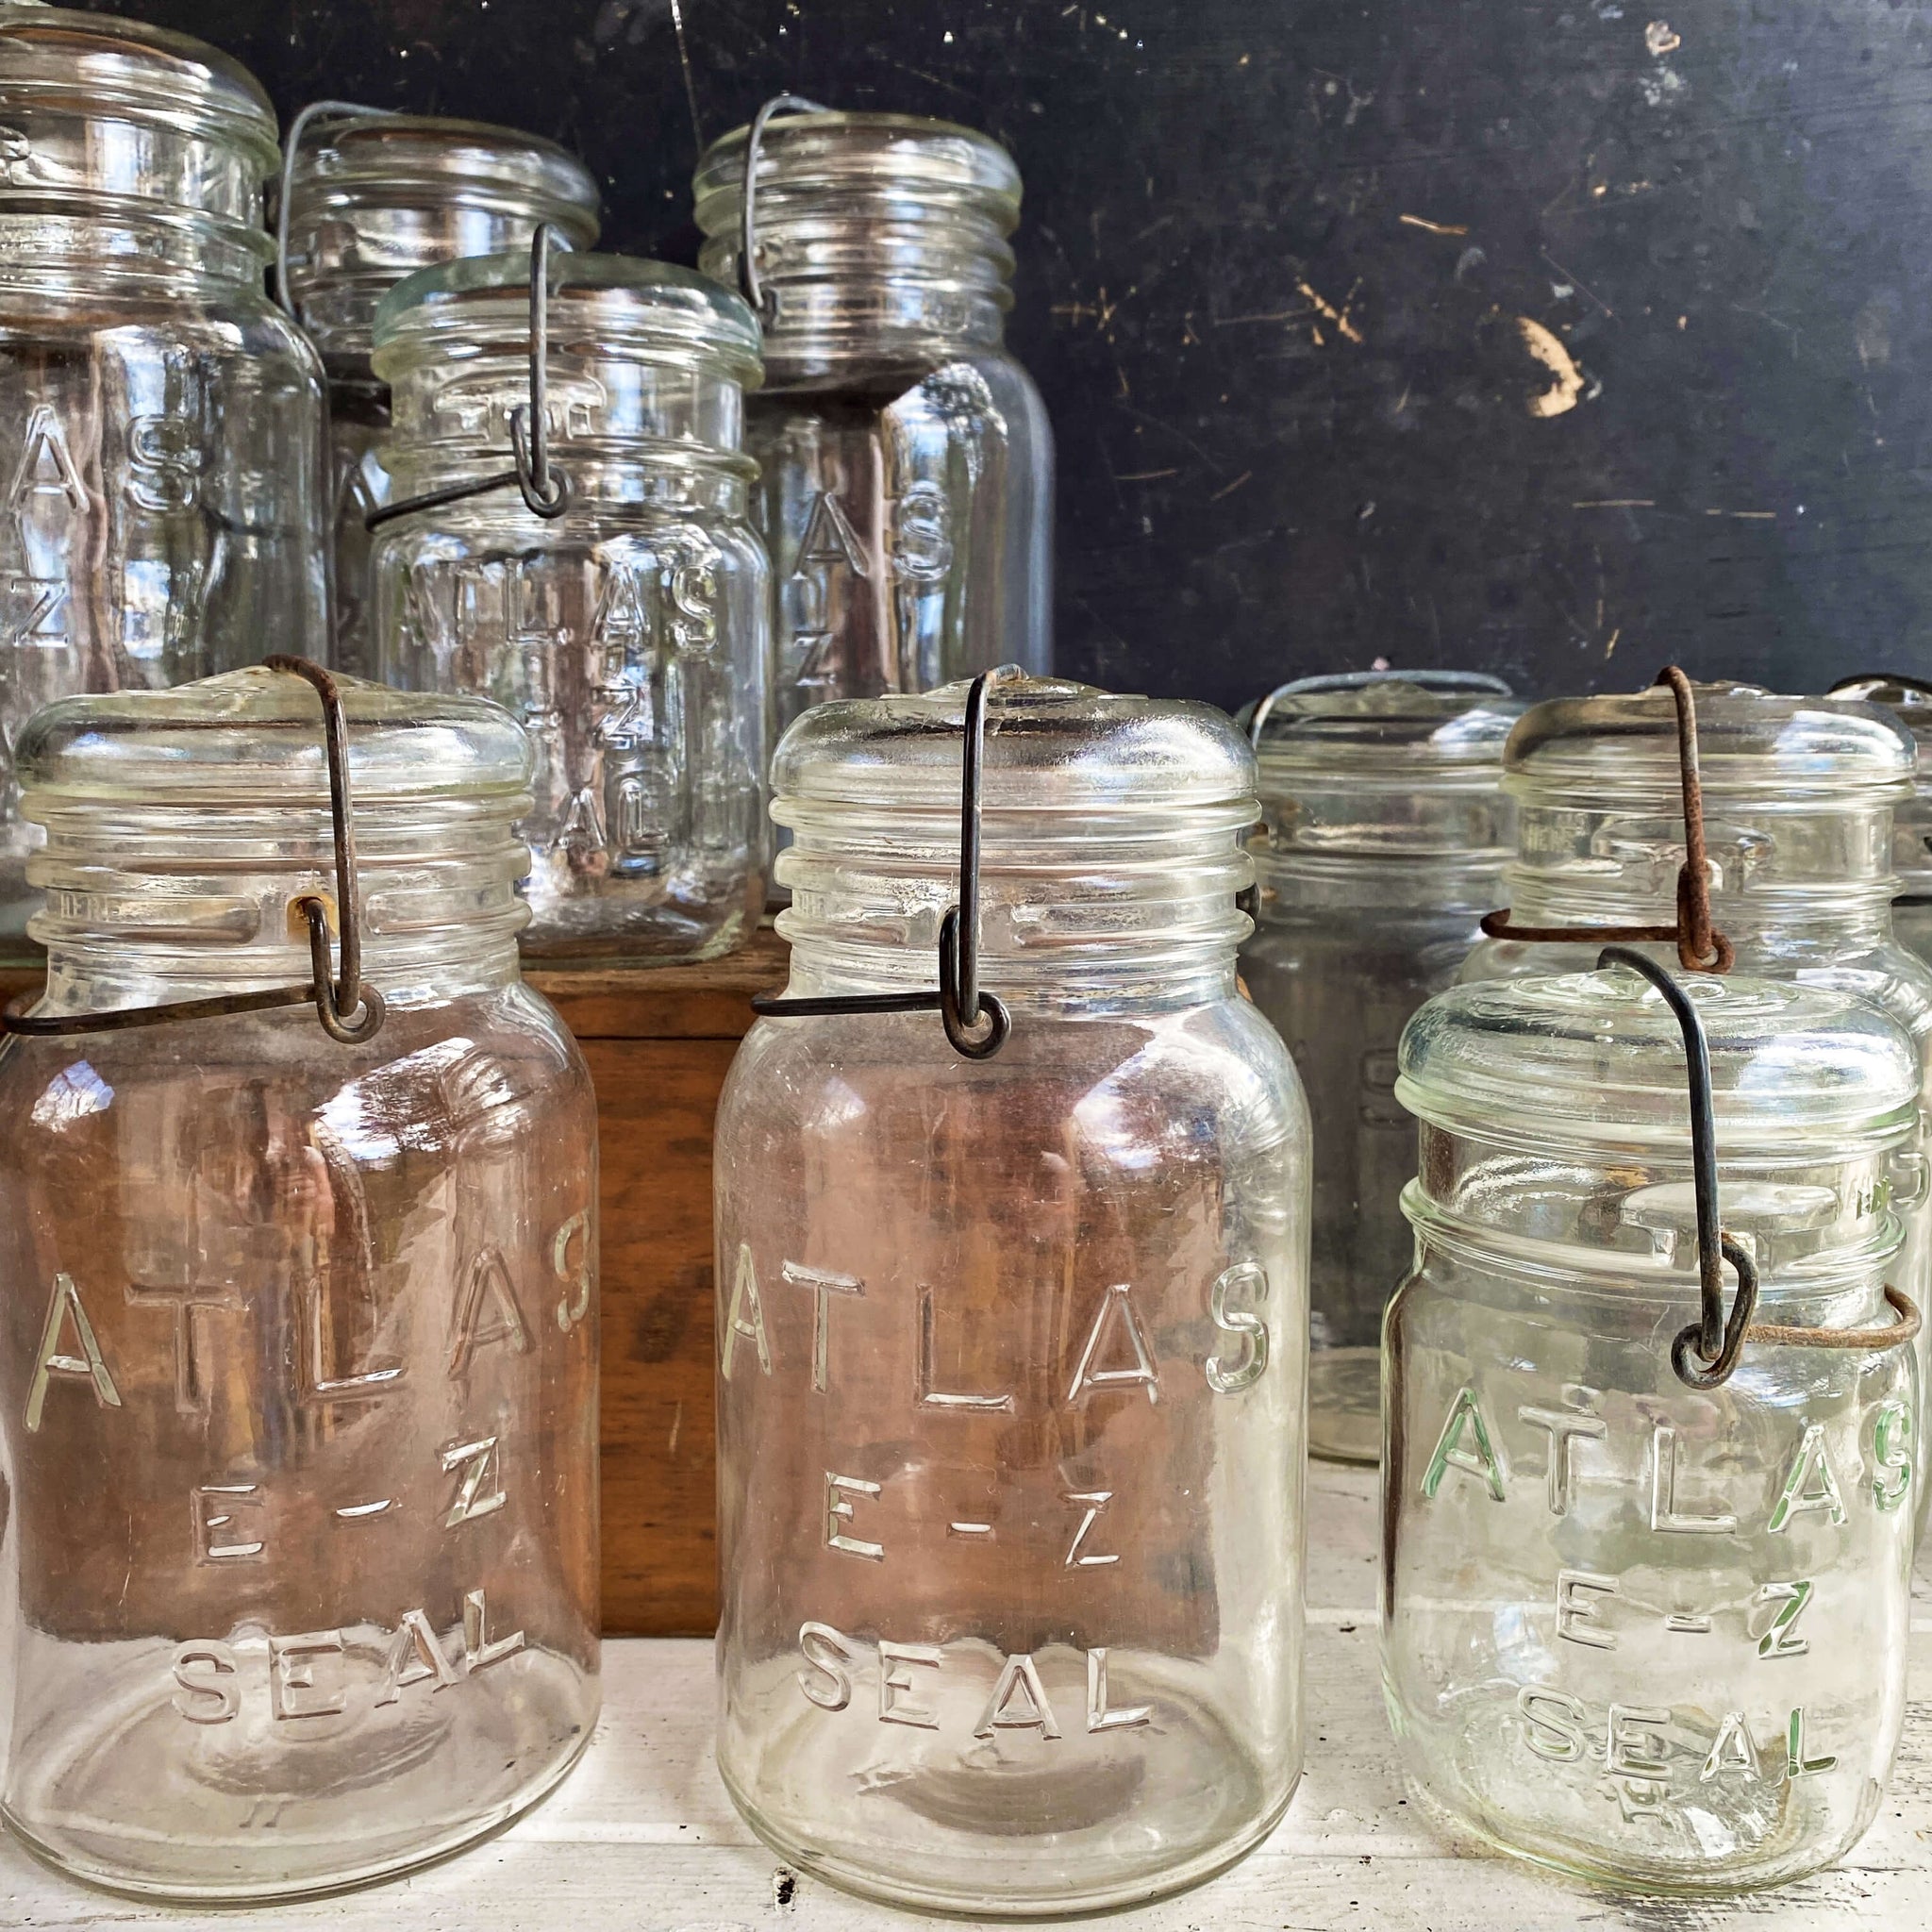 Vintage Atlas E-Z-Seal Glass Jars with Bail Wire - Quart and Pint Sizes - 15 Available